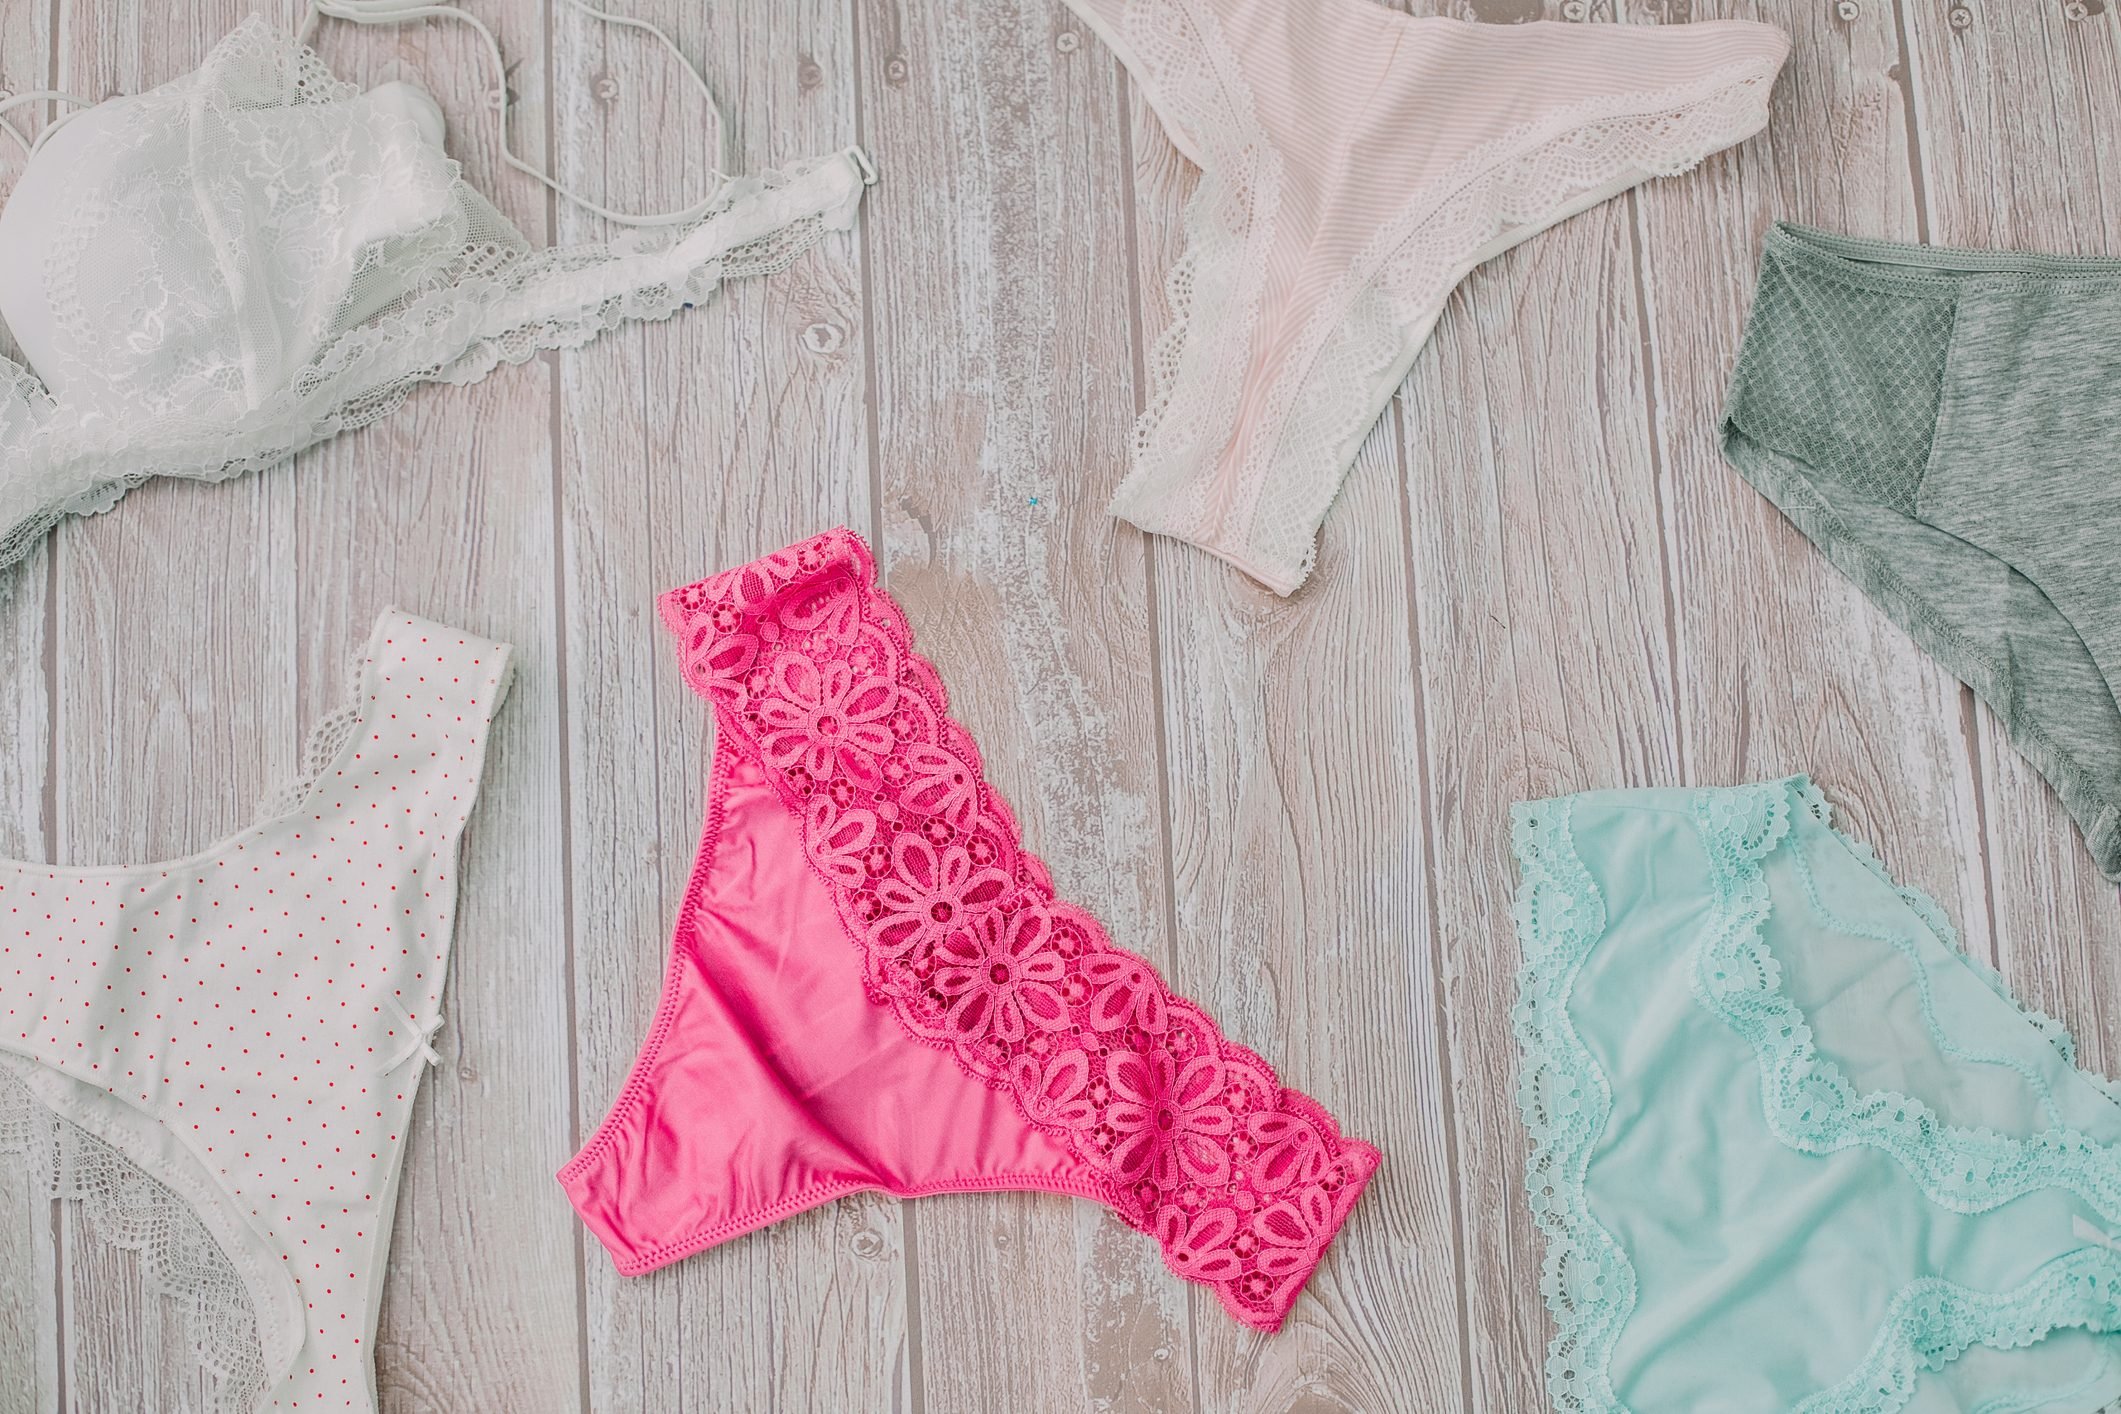 8 Underwear Mistakes That Can Mess With Your Health | The Healthy ...